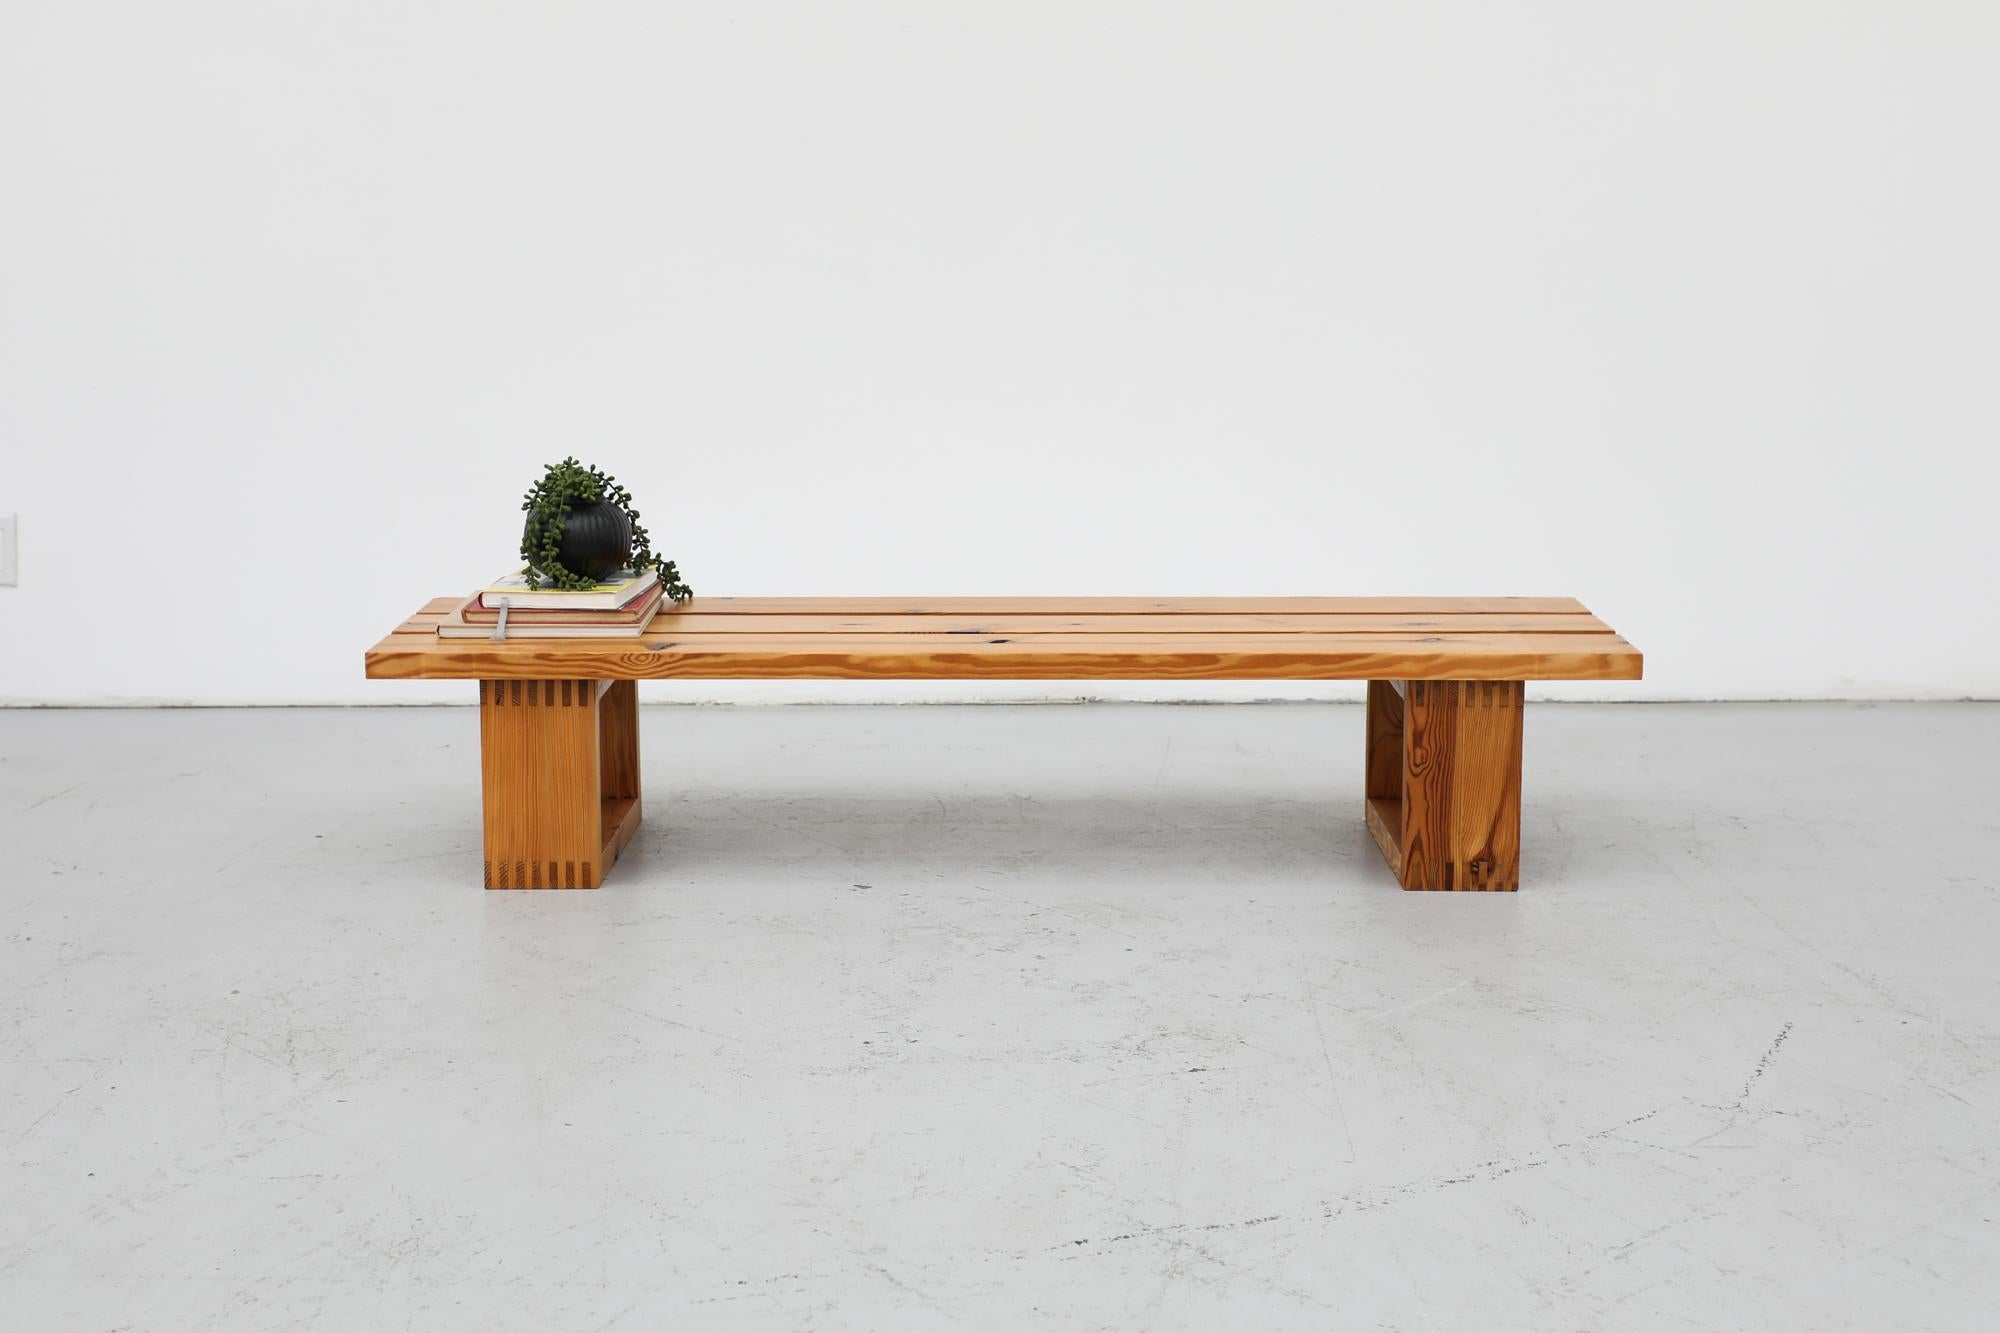 Ate van Apeldoorn designed, heavy pine slat bench with square feet and box joints. Great coffee table or bench under your favorite painting. Lightly refinished. Two more unfinished benches also available, listed separately (LU922434111732).